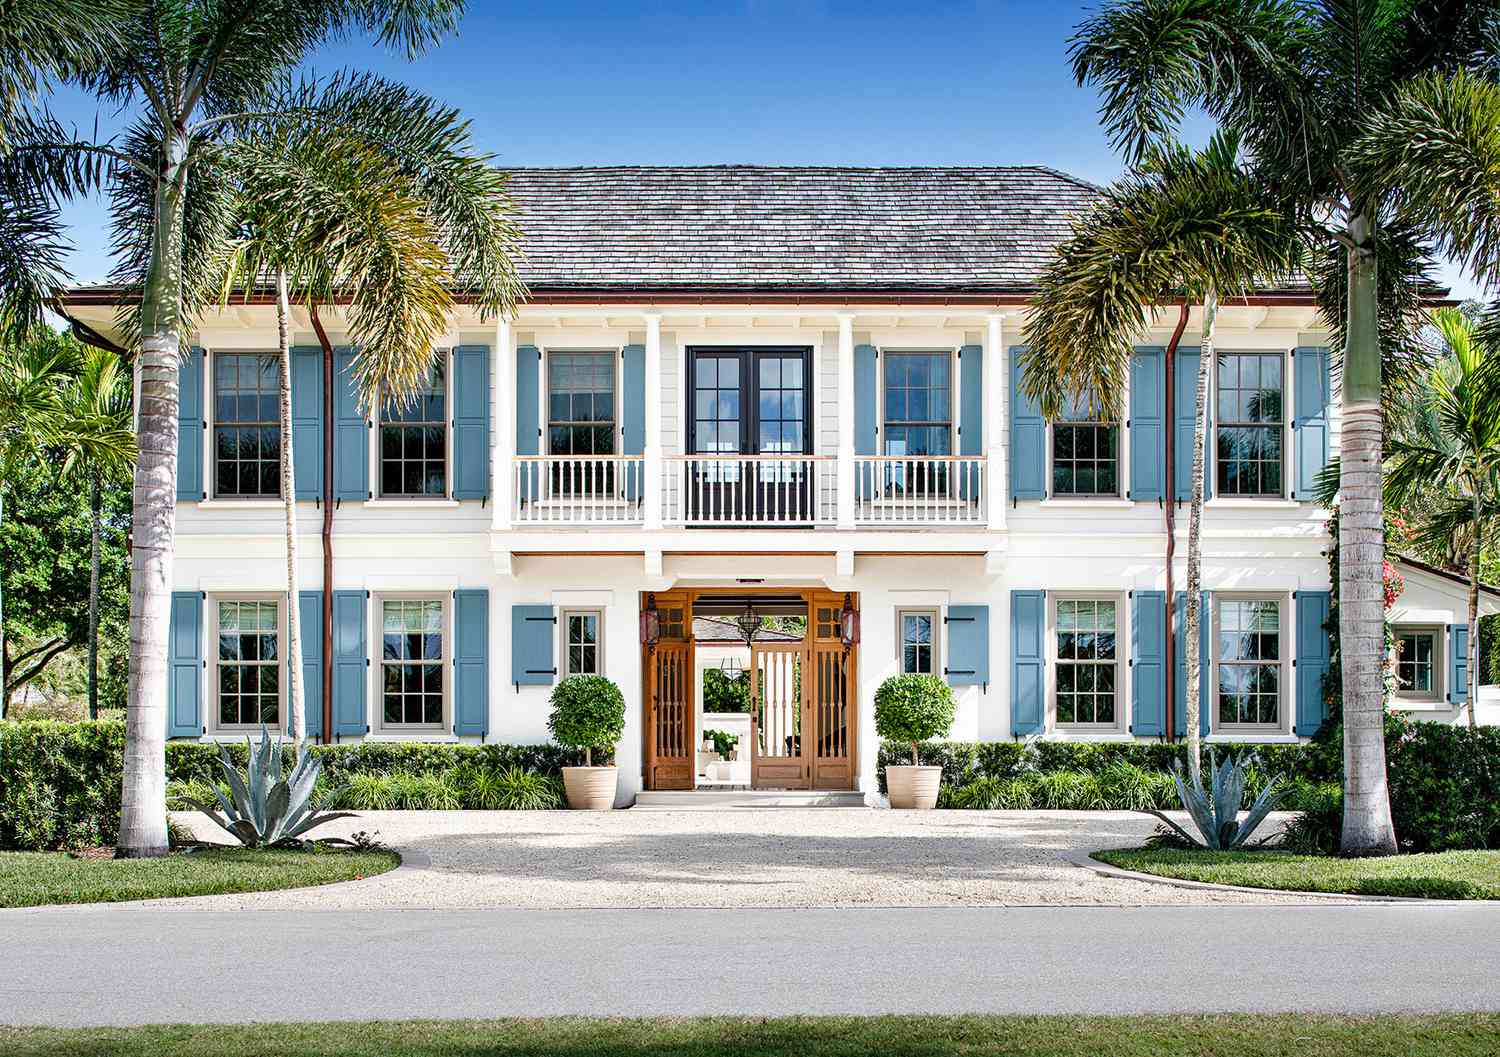 white colonial blue shutters wood french doors palm trees copper gutters topiaries